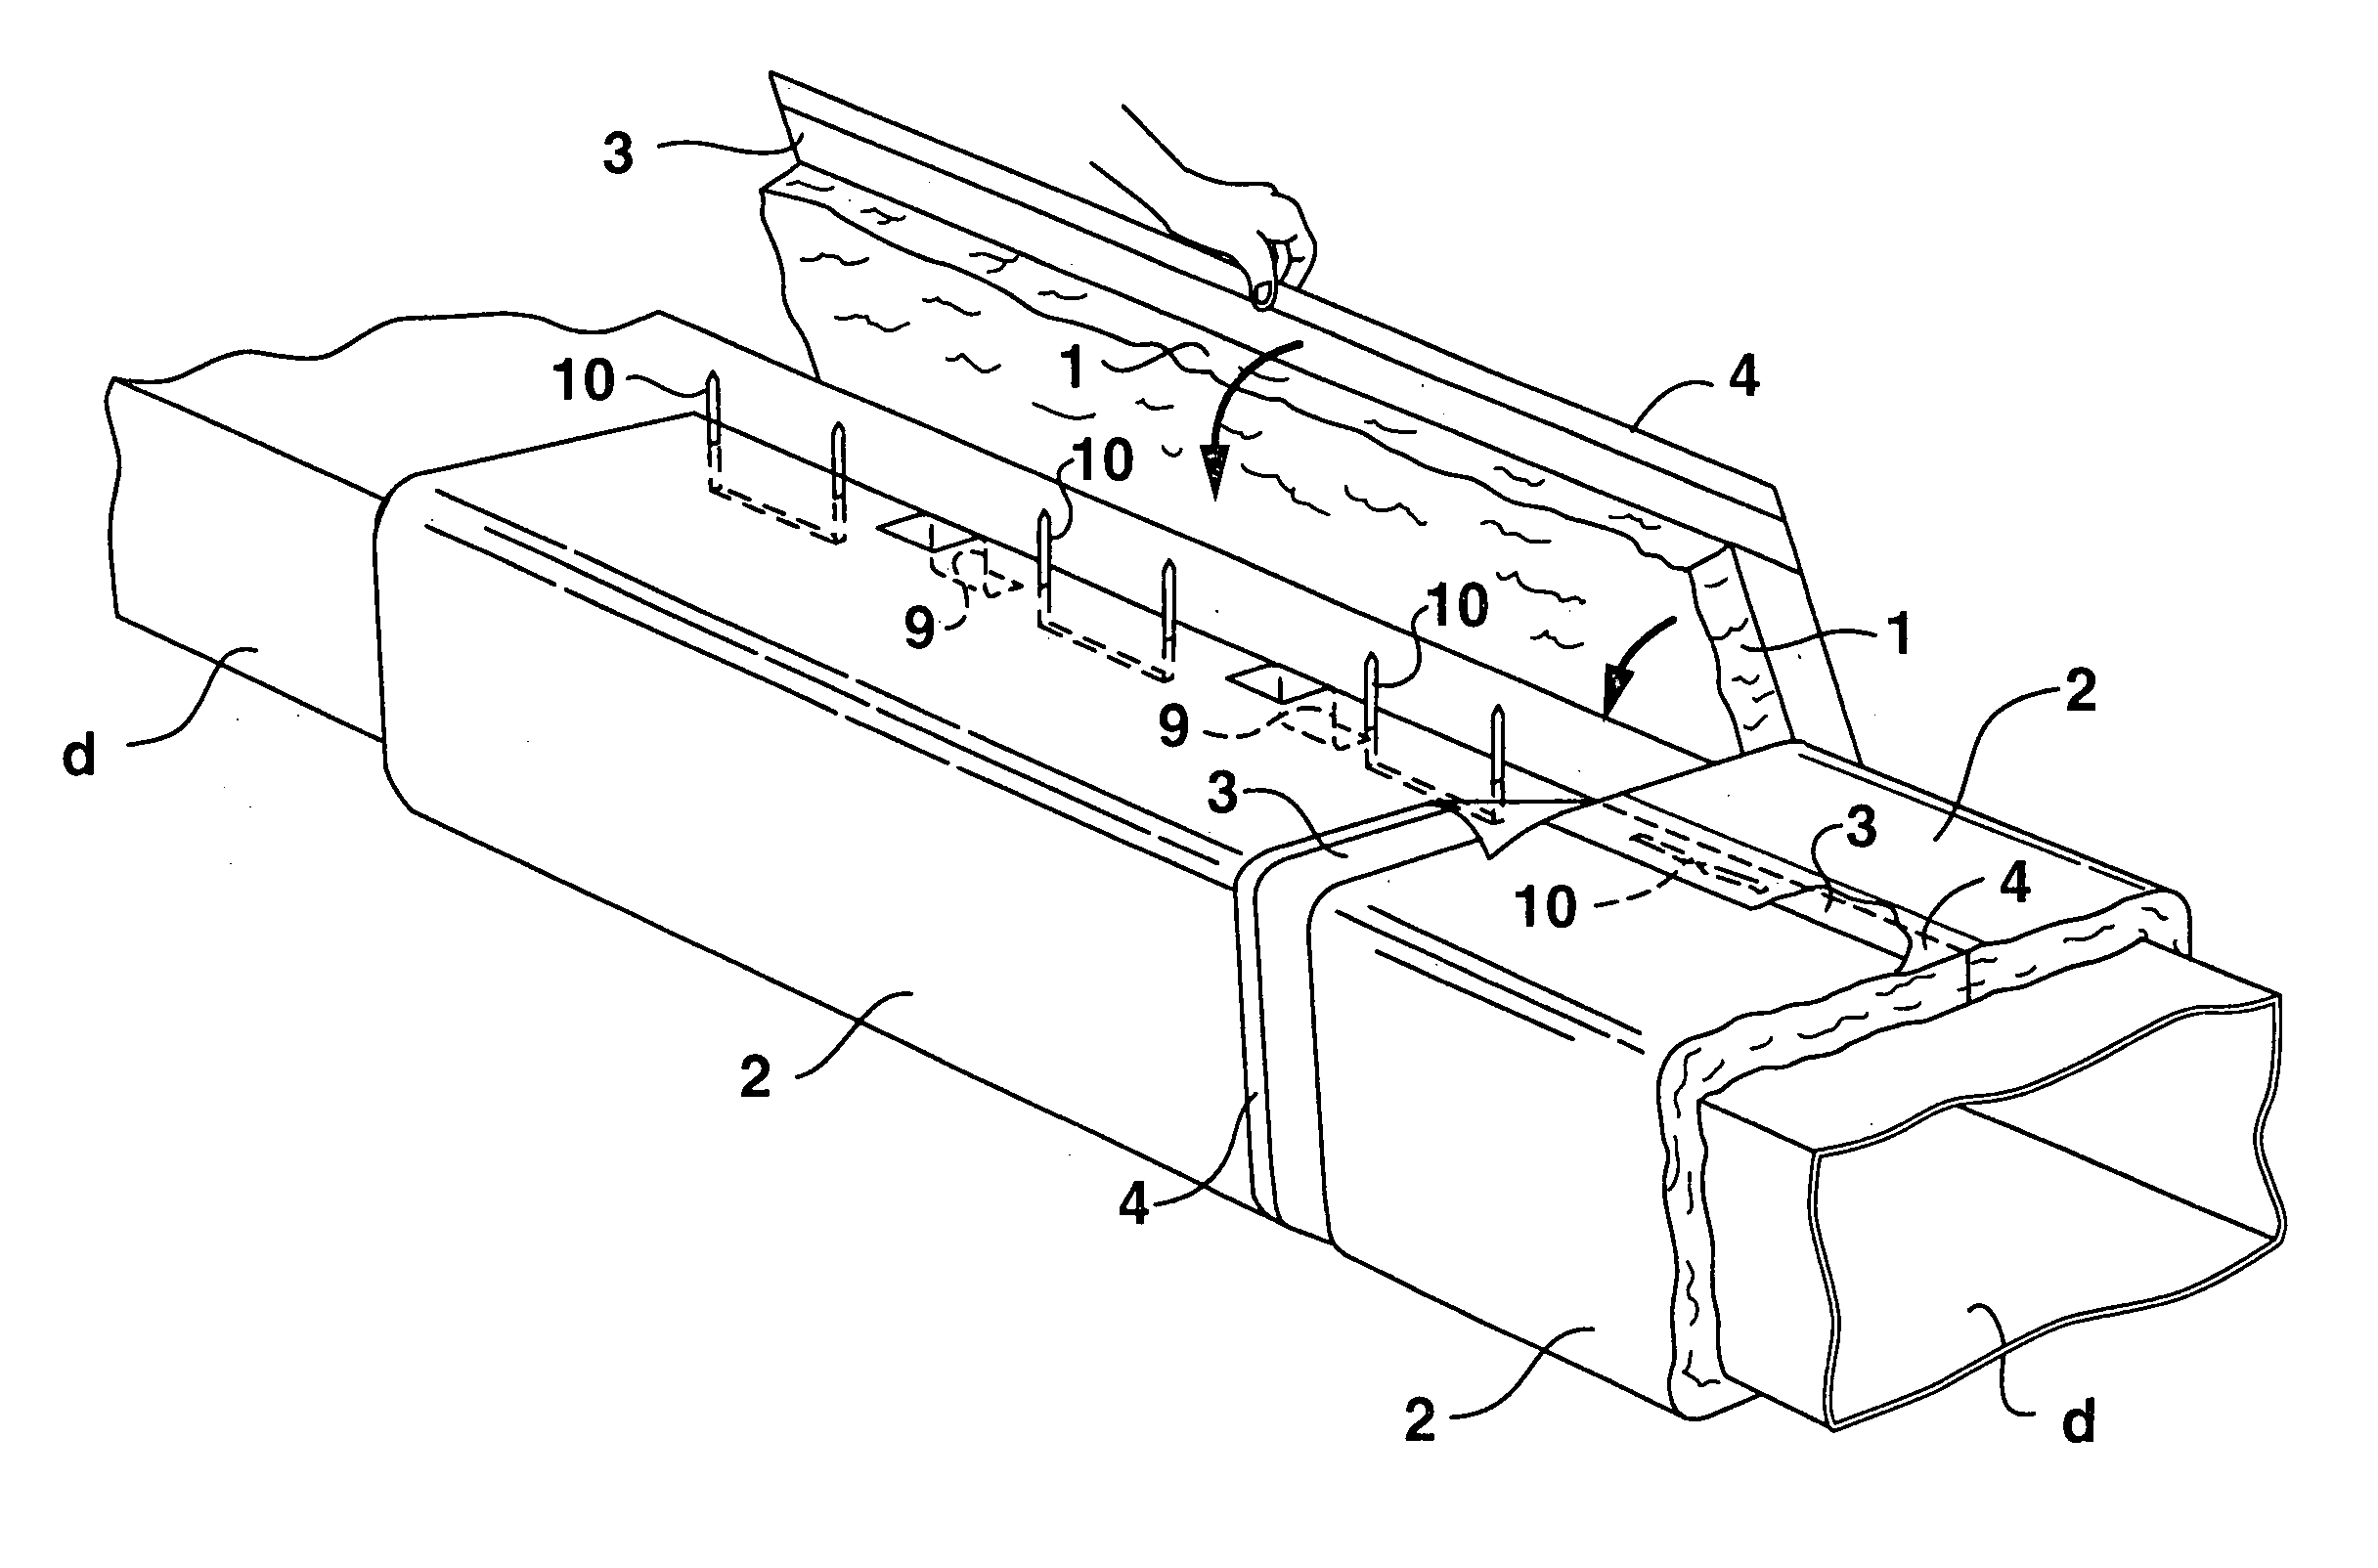 Prefabricated insulation for HVAC ductwork and other fluid conduits